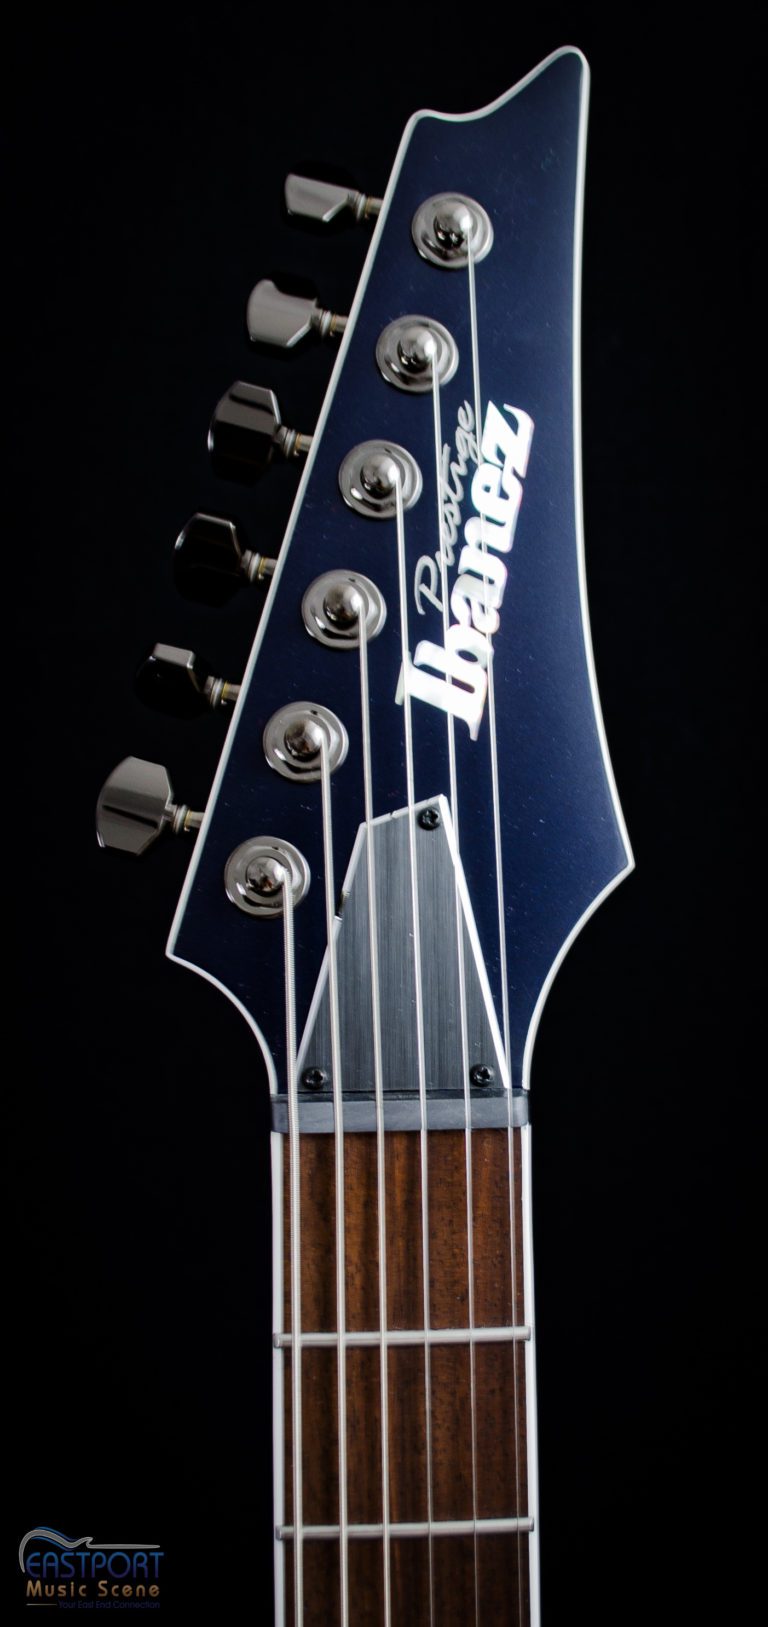 A close up of the headstock on an ibanez guitar.